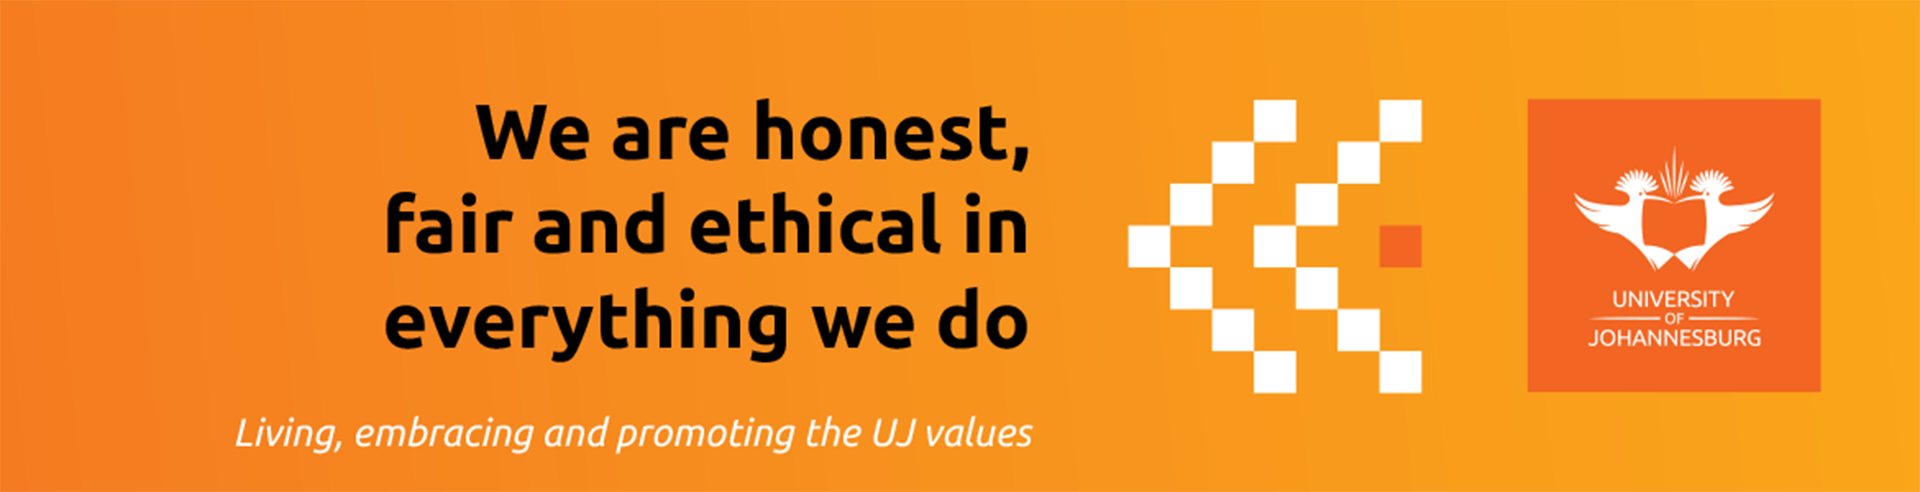 Uj Values Expressions Posters 2020 Ulink 1170x300mm 24